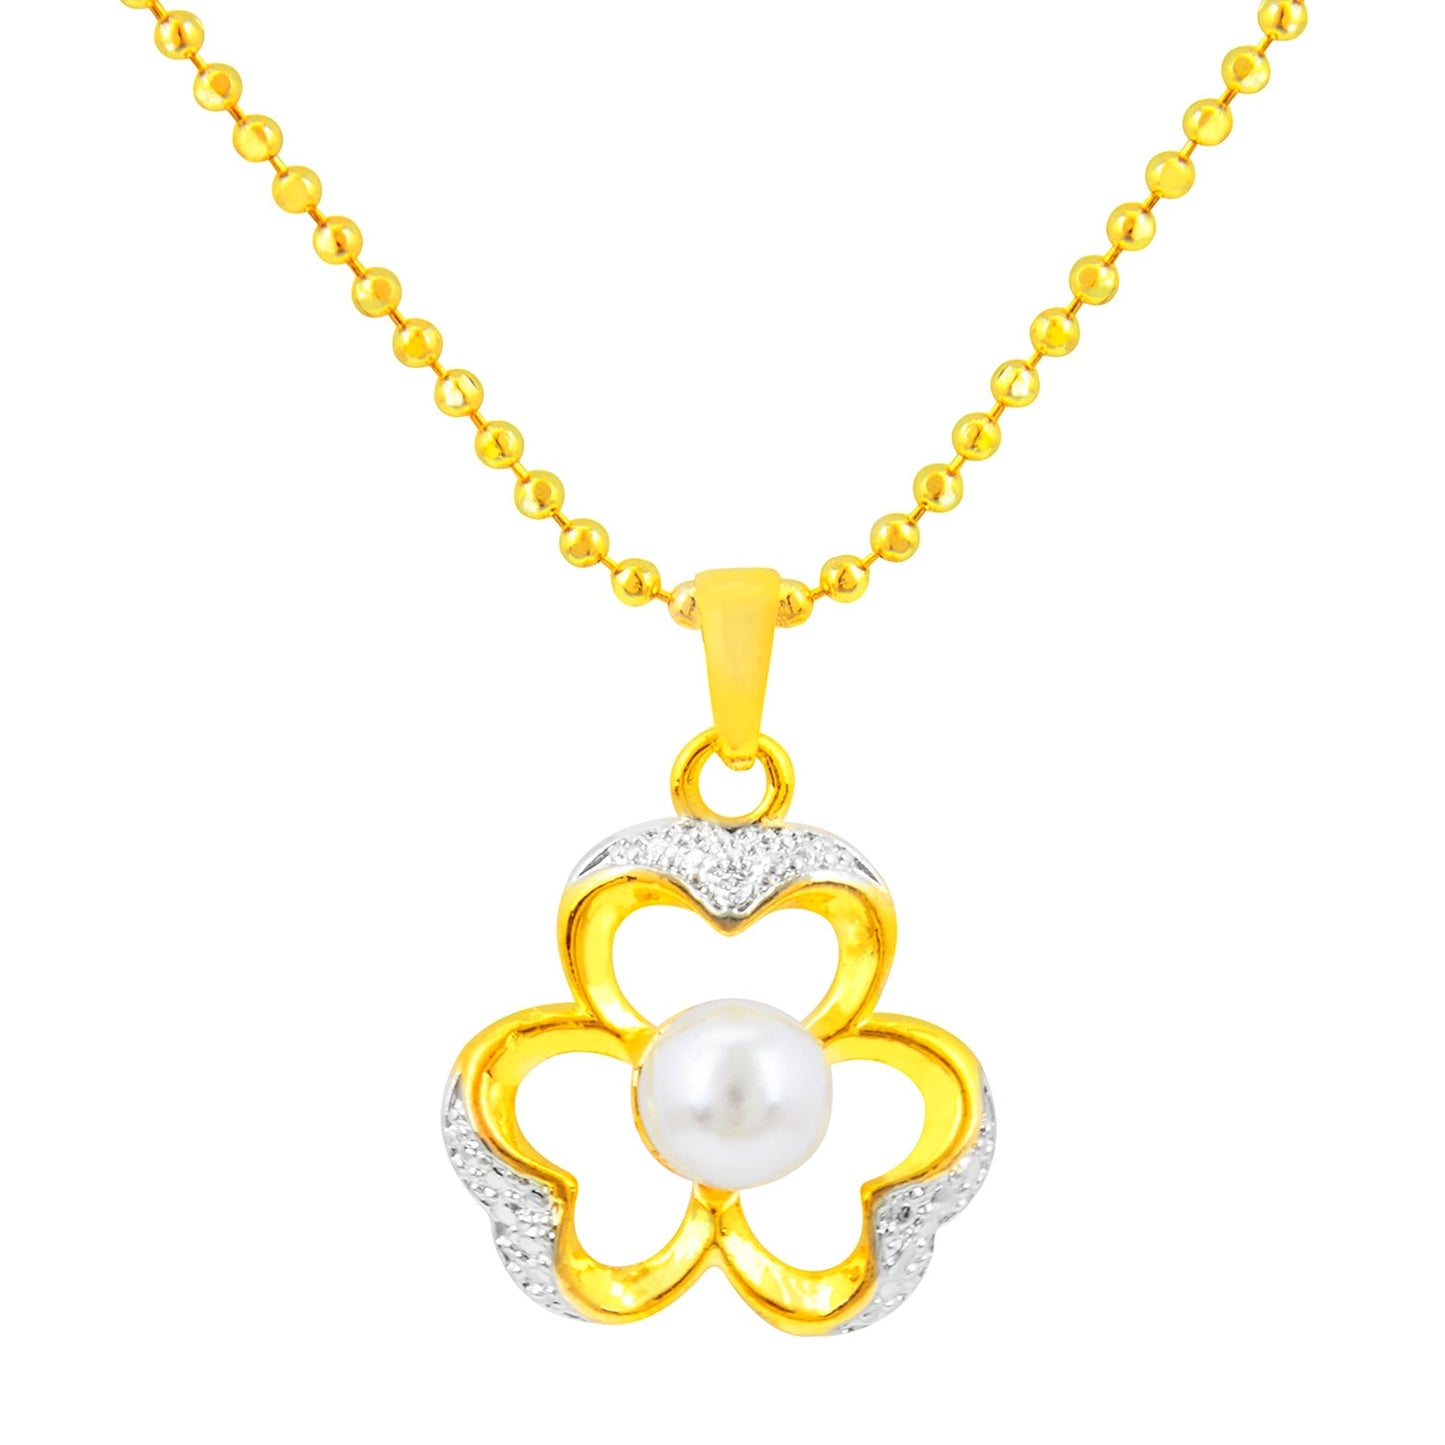 Gold Plated Flower Pendant With Chain & Pearls (SJ_2236)